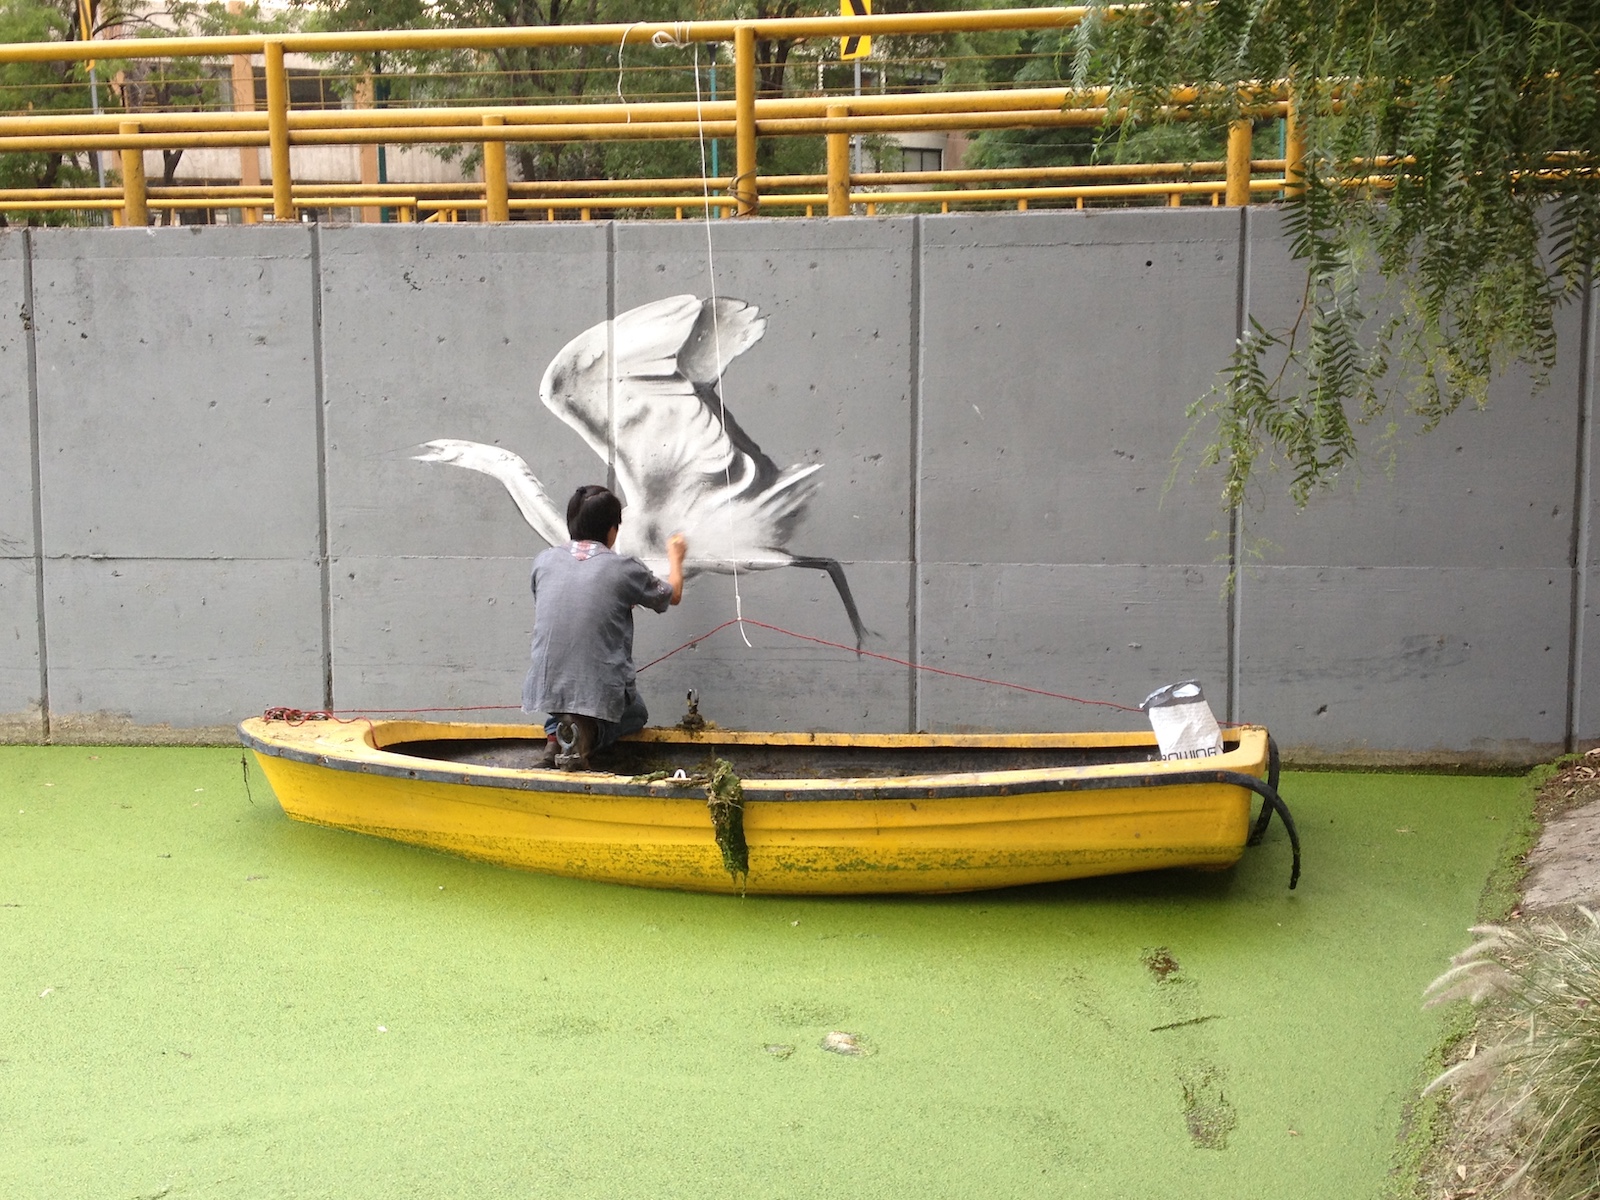 Painting of a swan on the side of the Canal in 2018, courtesy of Fundacion López de La Rosa.